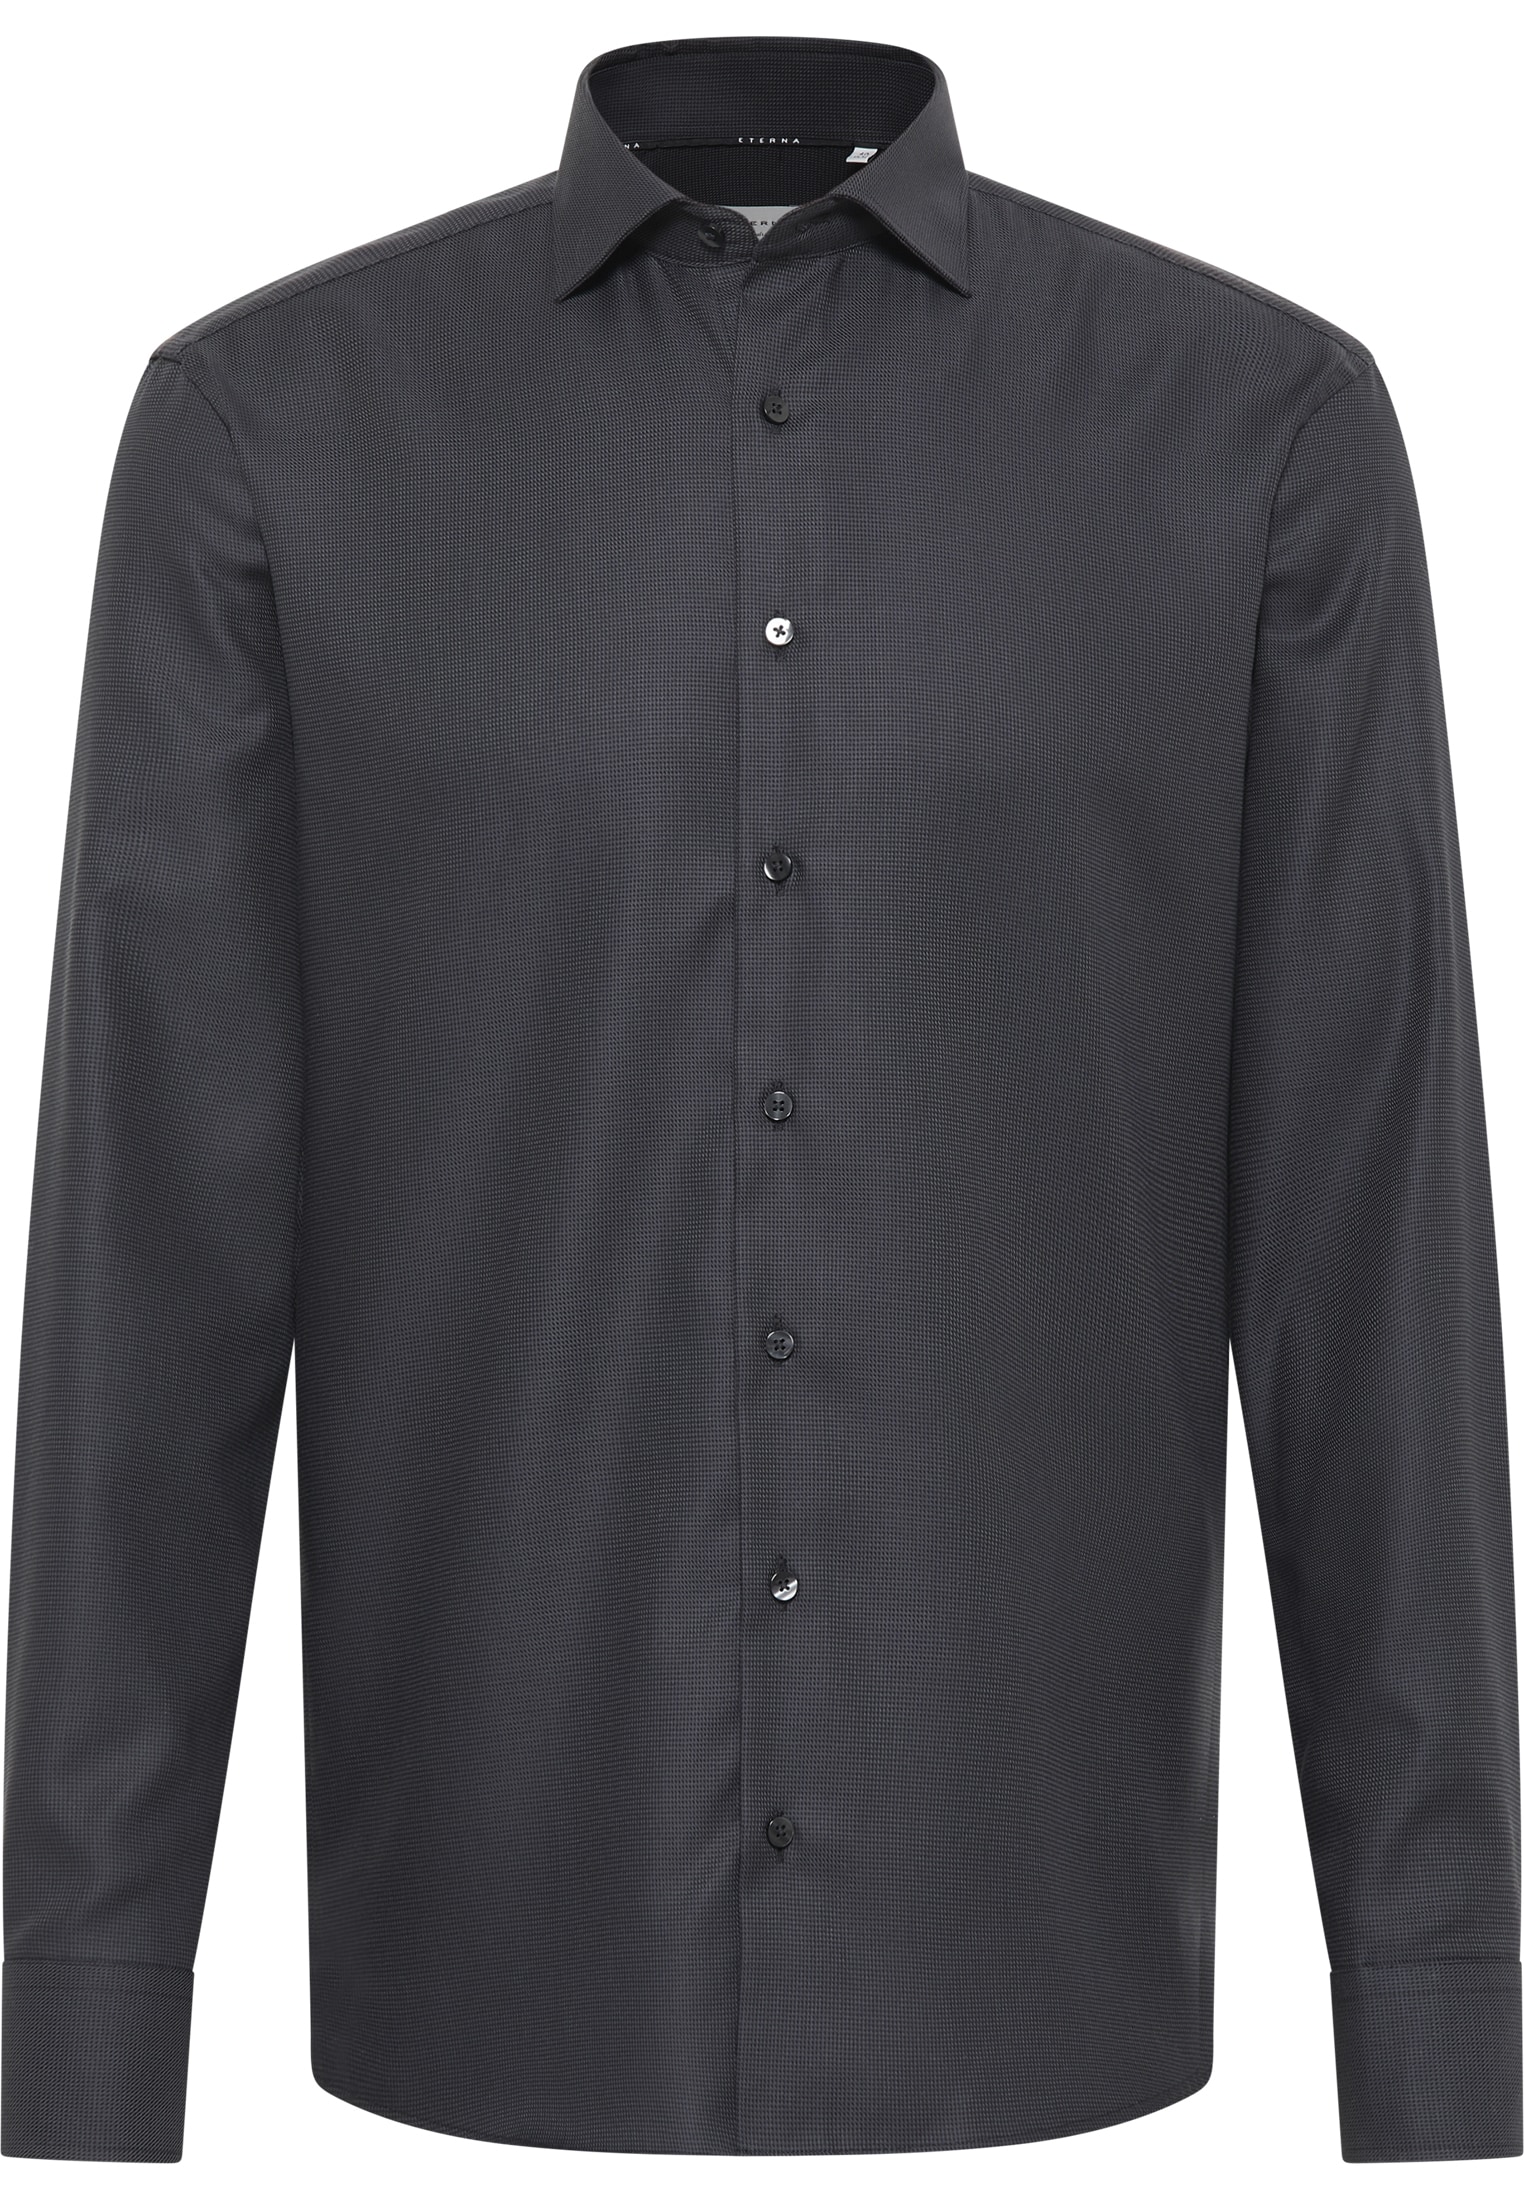 SLIM FIT Shirt in anthracite structured